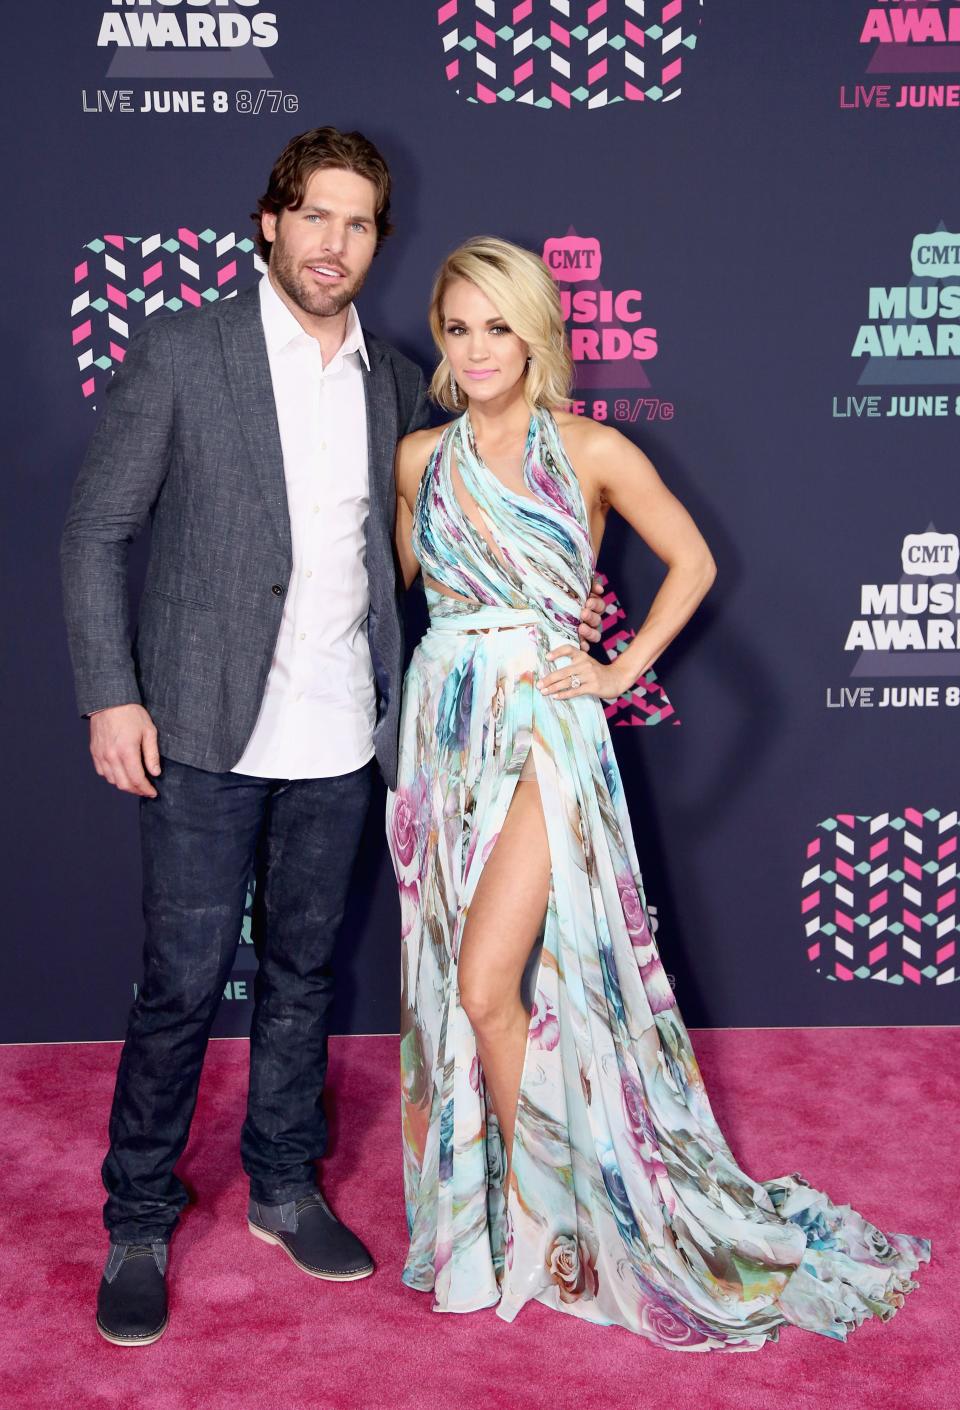 Mike Fisher (L) and Carrie Underwood attend the 2016 CMT Music awards